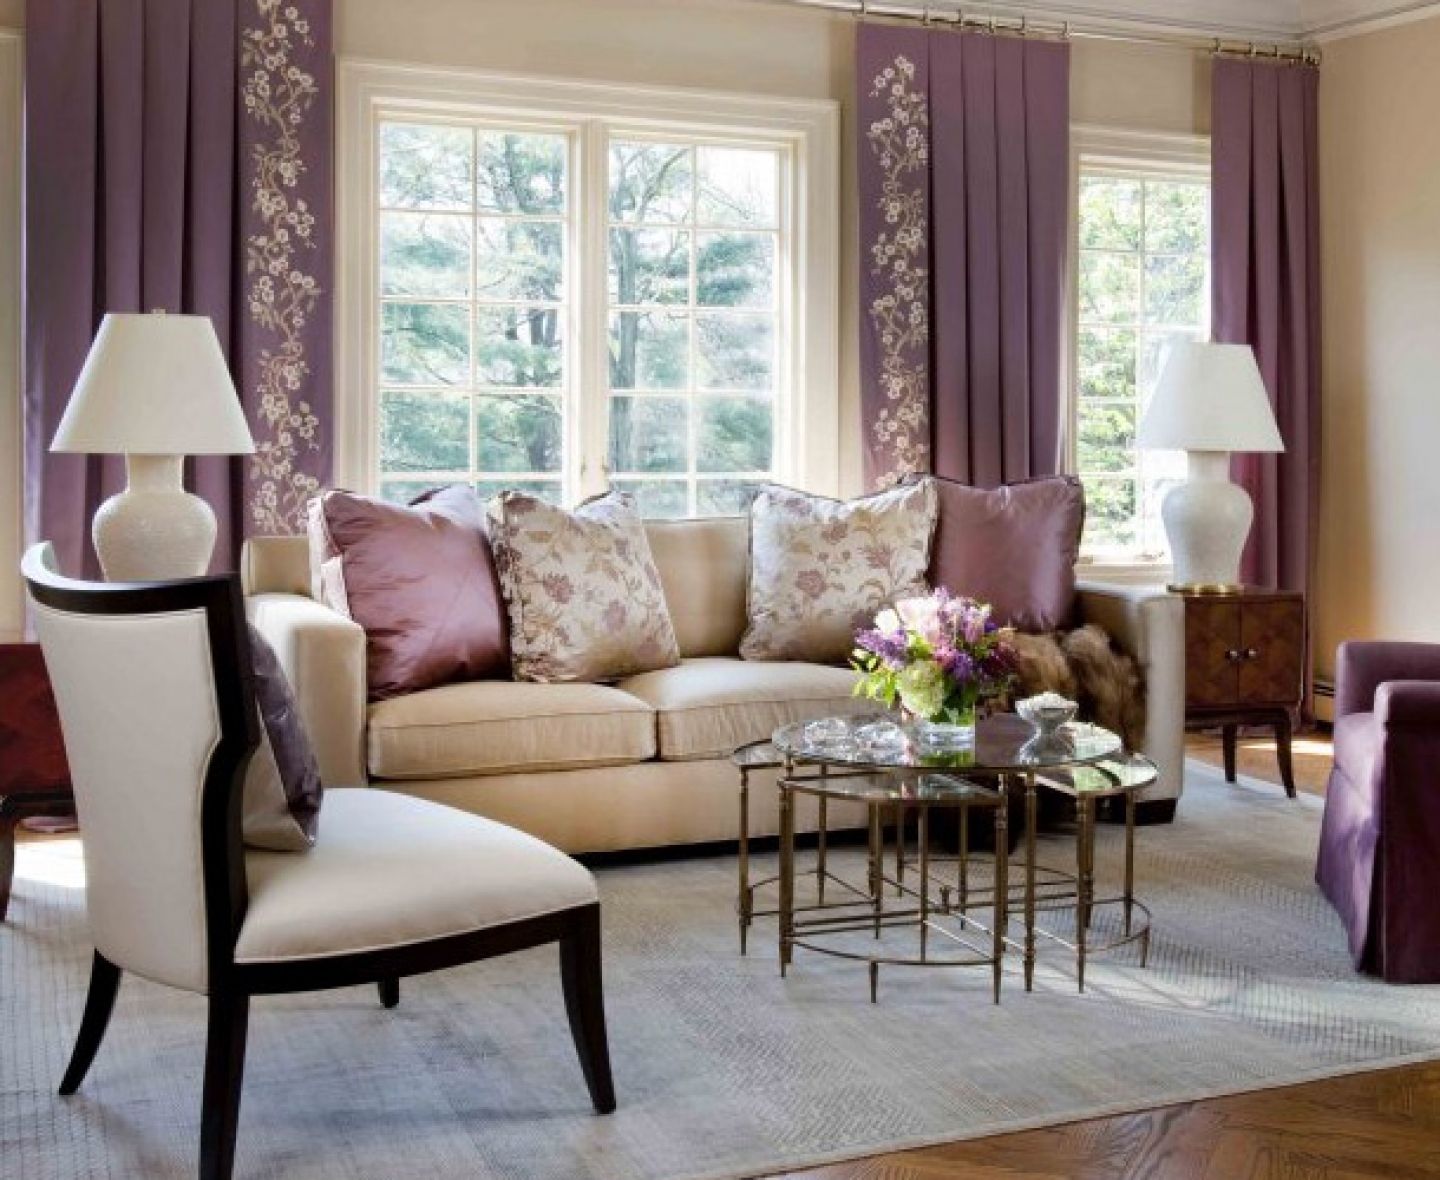 Room Design House Living Room Design Of A House With Wooden Floor Purple Curtained Windows Couches With Pillows And Coffee Table For Vintage Living Room Ideas Living Room 10 Vintage Living Room With Chic Contemporary Furniture